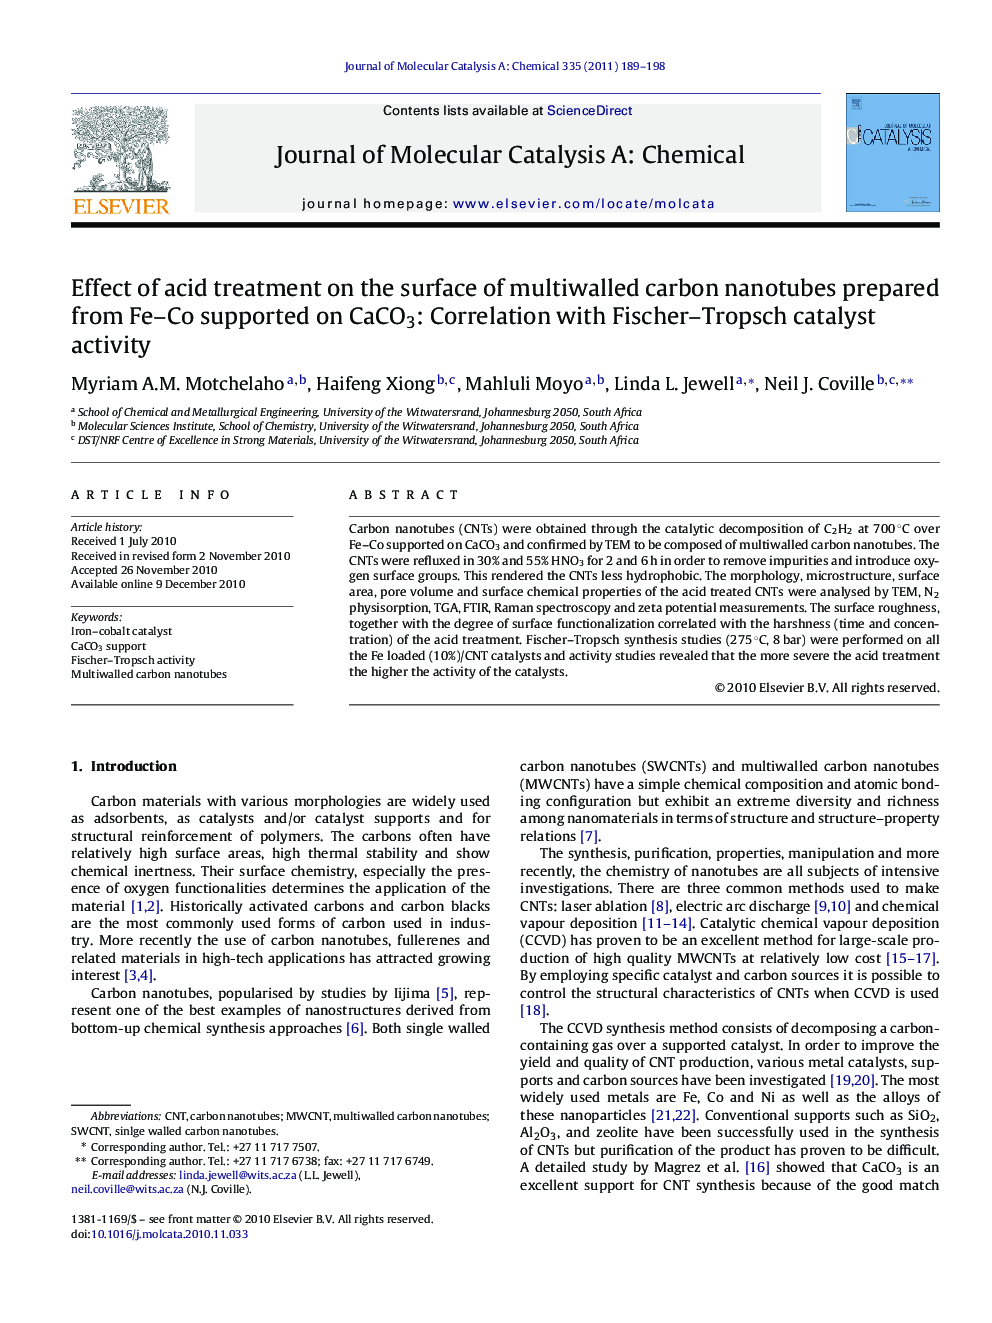 Effect of acid treatment on the surface of multiwalled carbon nanotubes prepared from Fe–Co supported on CaCO3: Correlation with Fischer–Tropsch catalyst activity